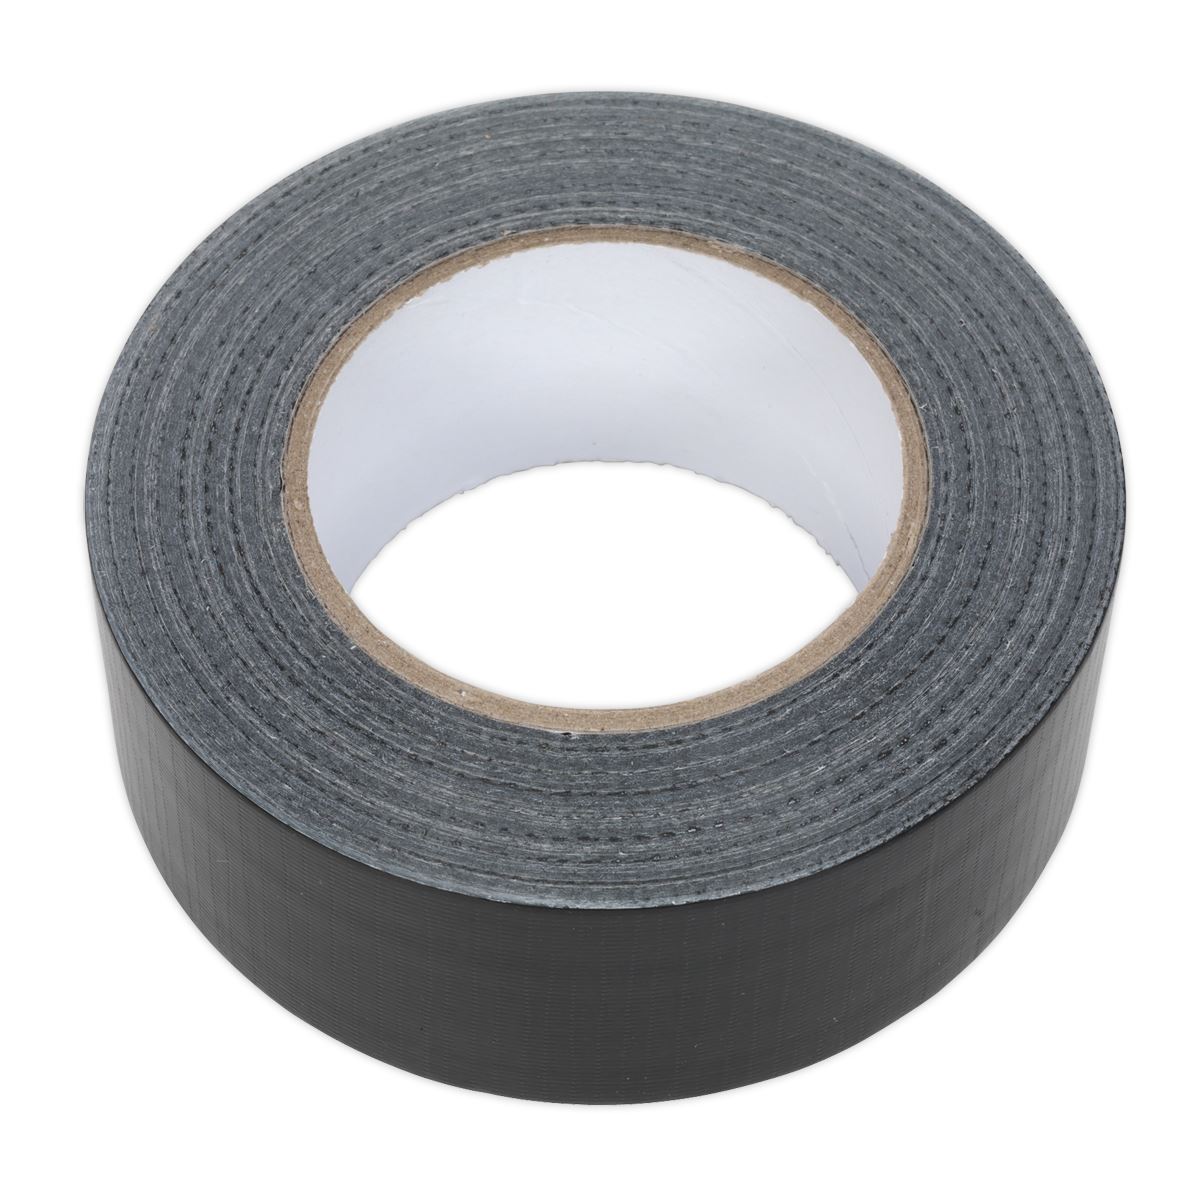 Sealey 48mm x 50m Duct Tape